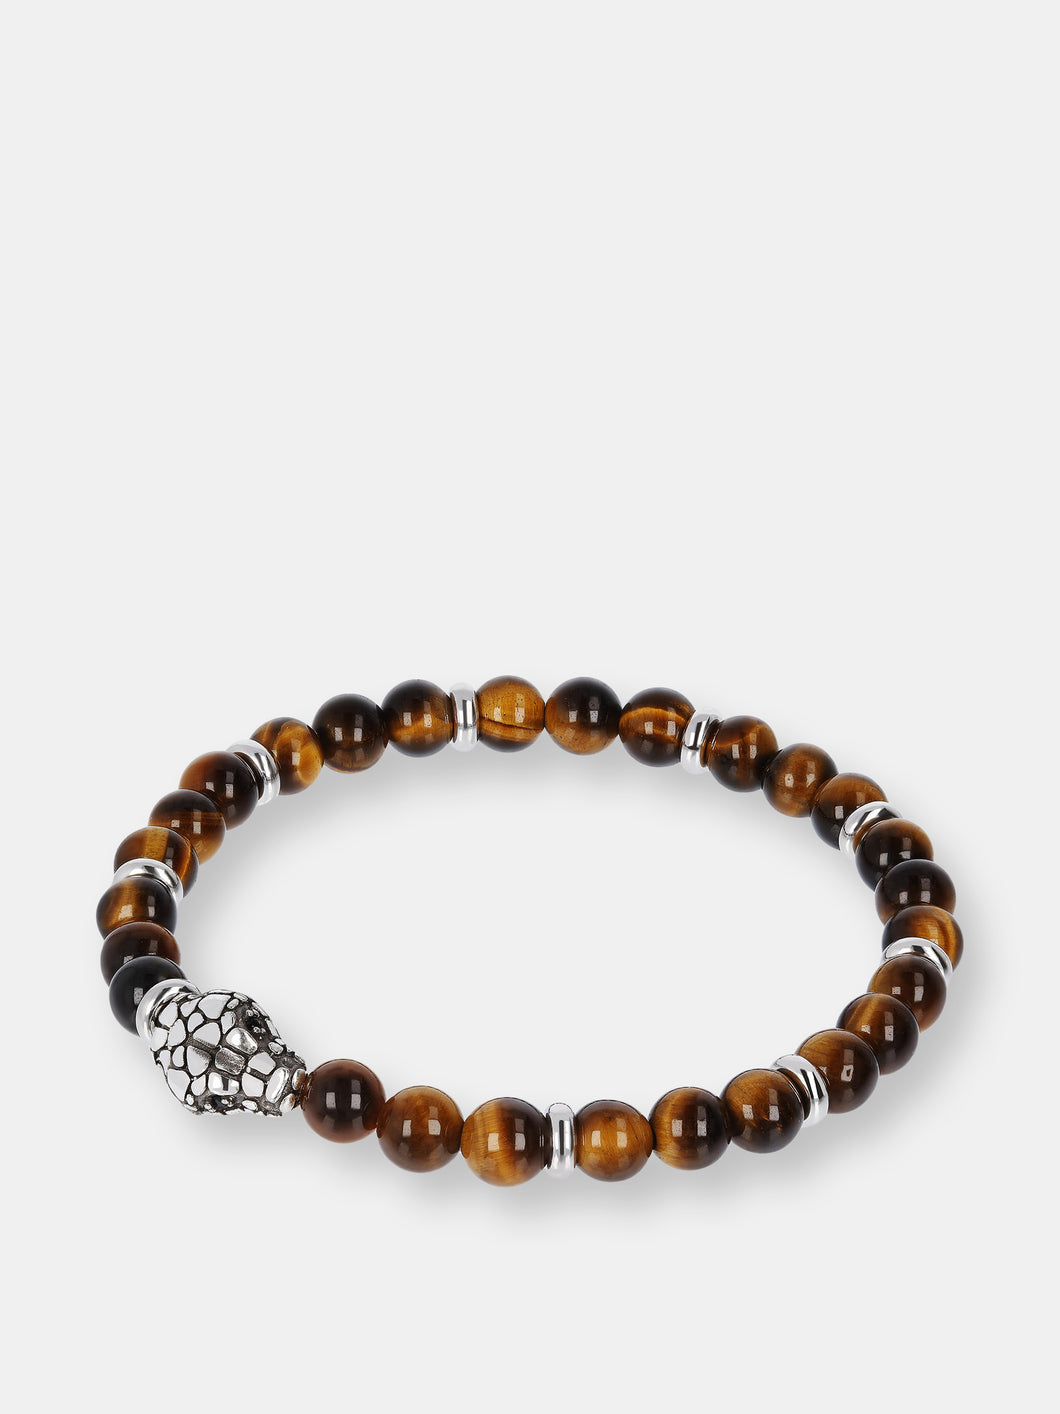 Elastic Bracelet with Stones and Snake Head